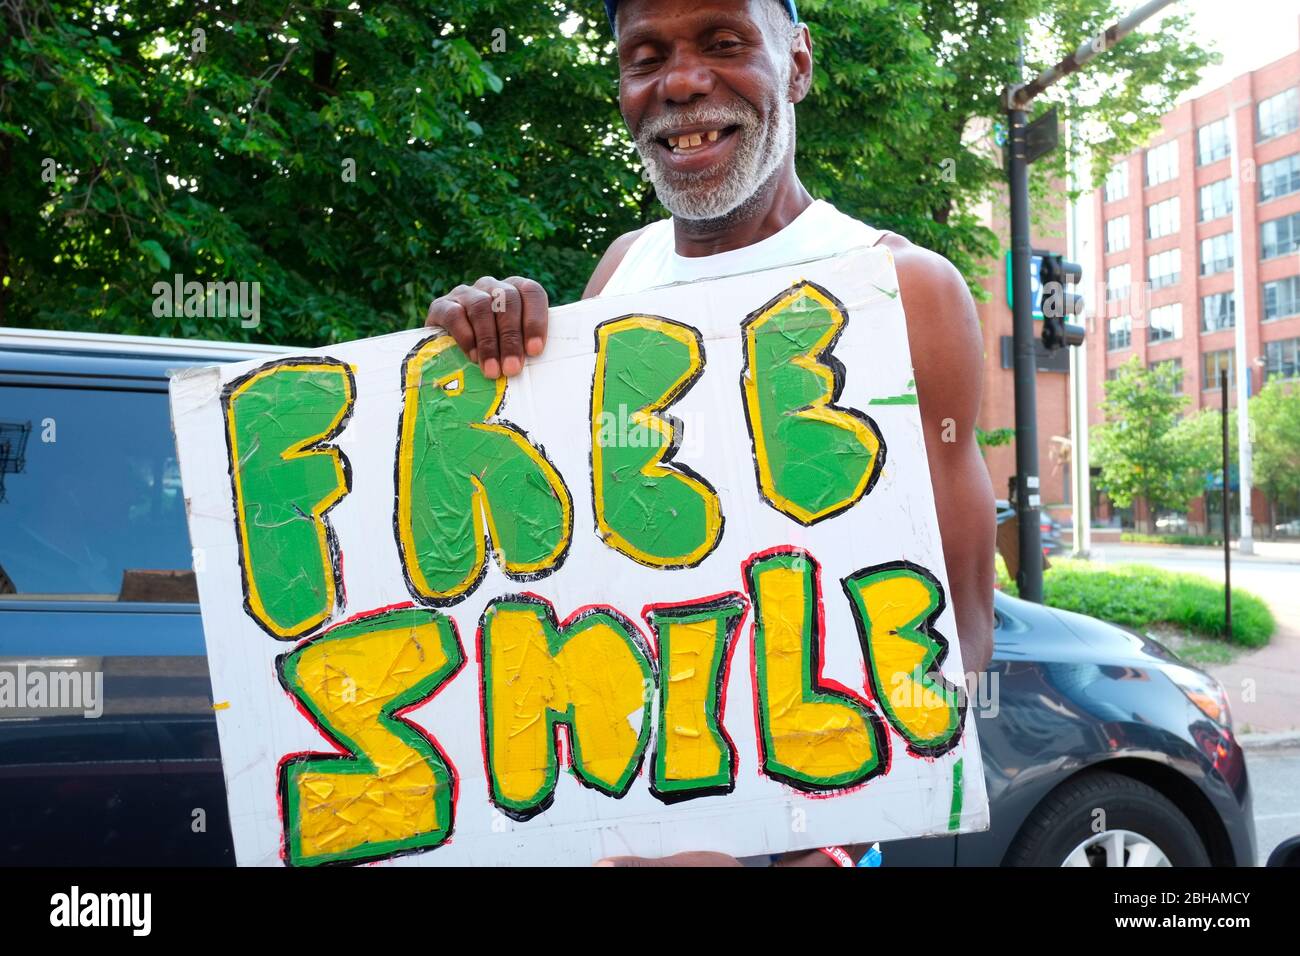 Man holding a sign 'Free Smile' smiles into the camera Stock Photo